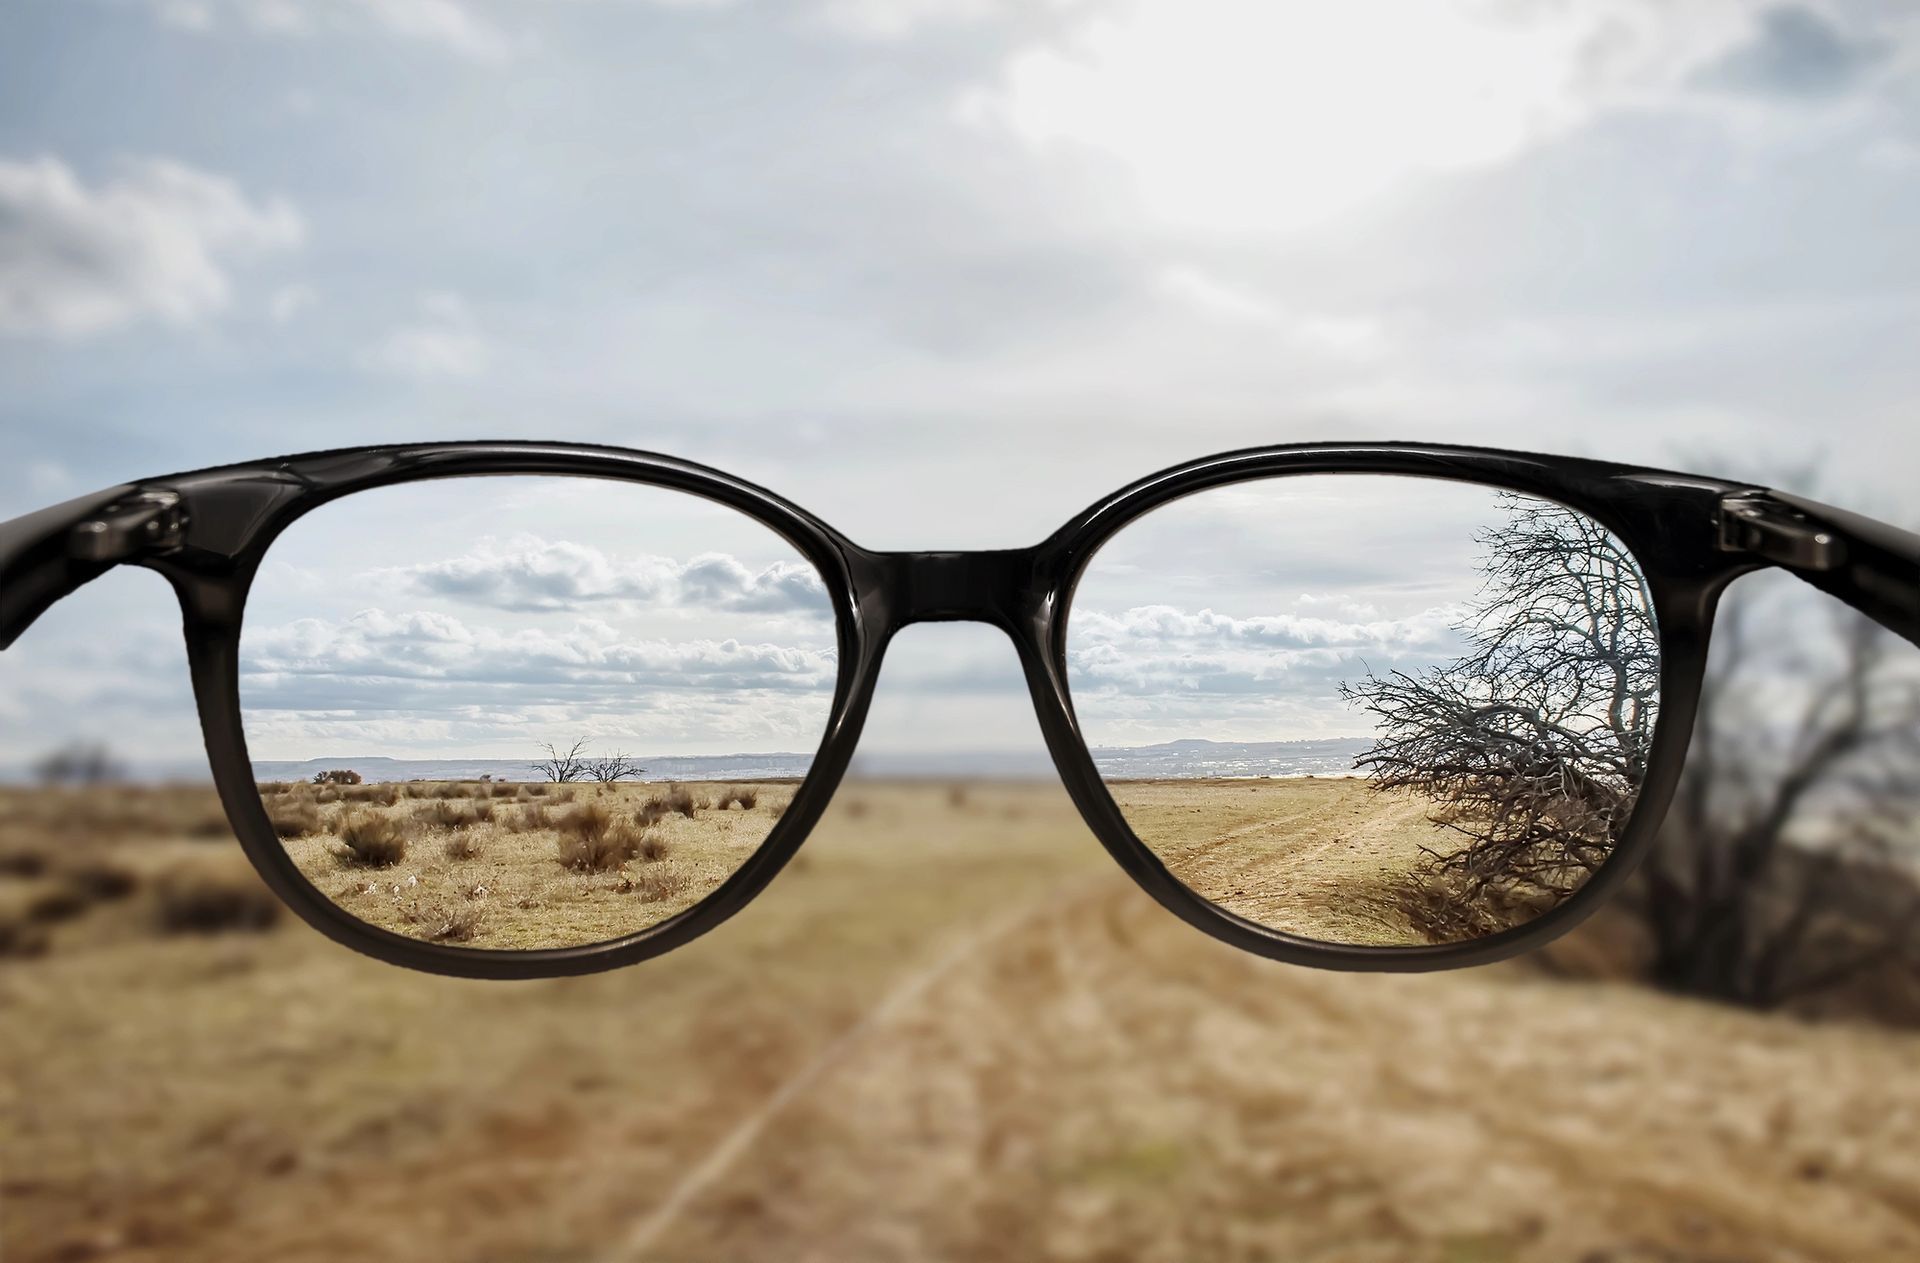 A pair of glasses looking out over a field.